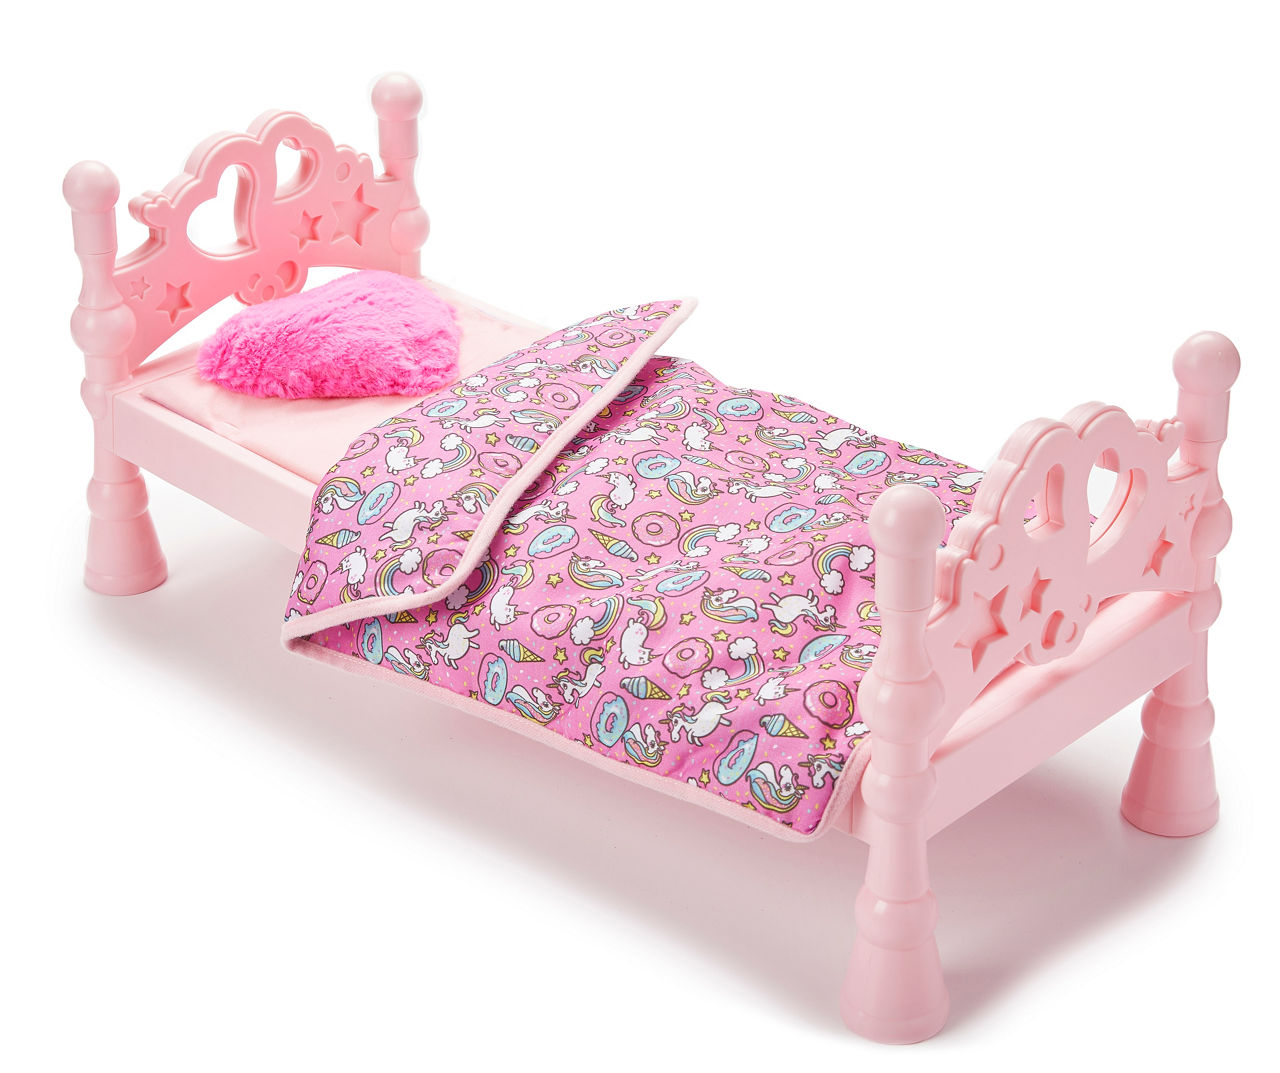 Barbie Doll Bed